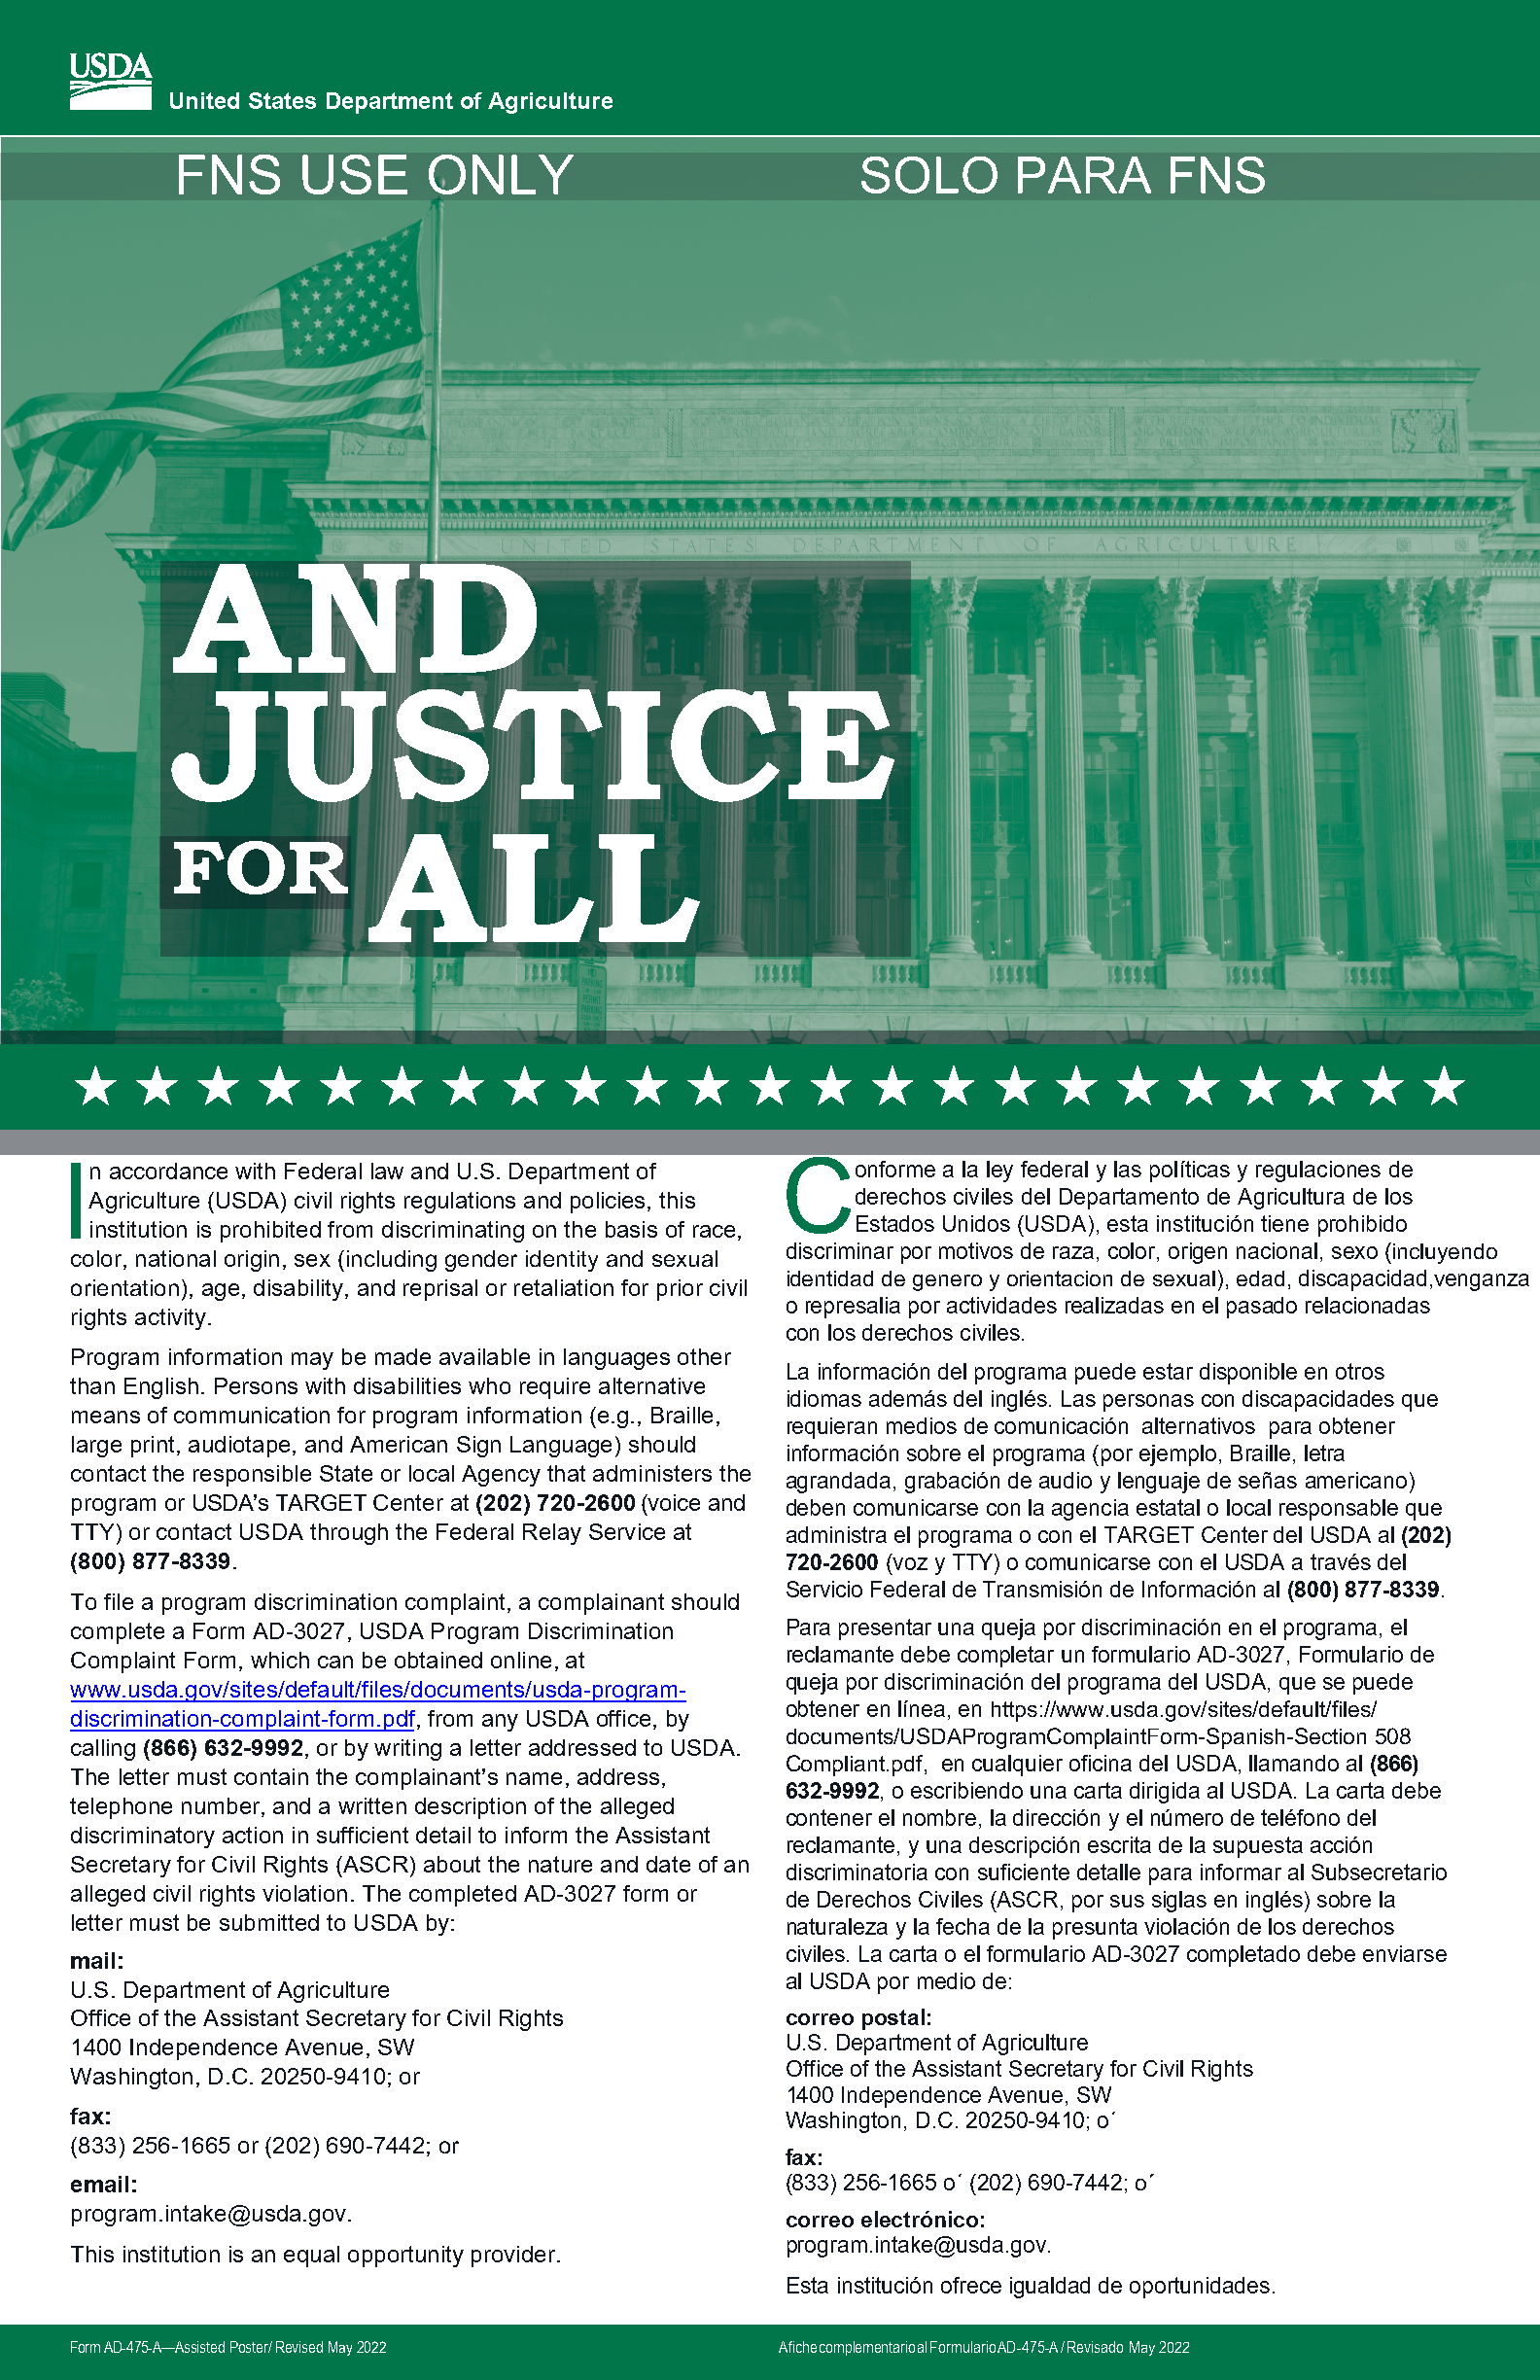 And Justice for All Agriculture Dept Flyer